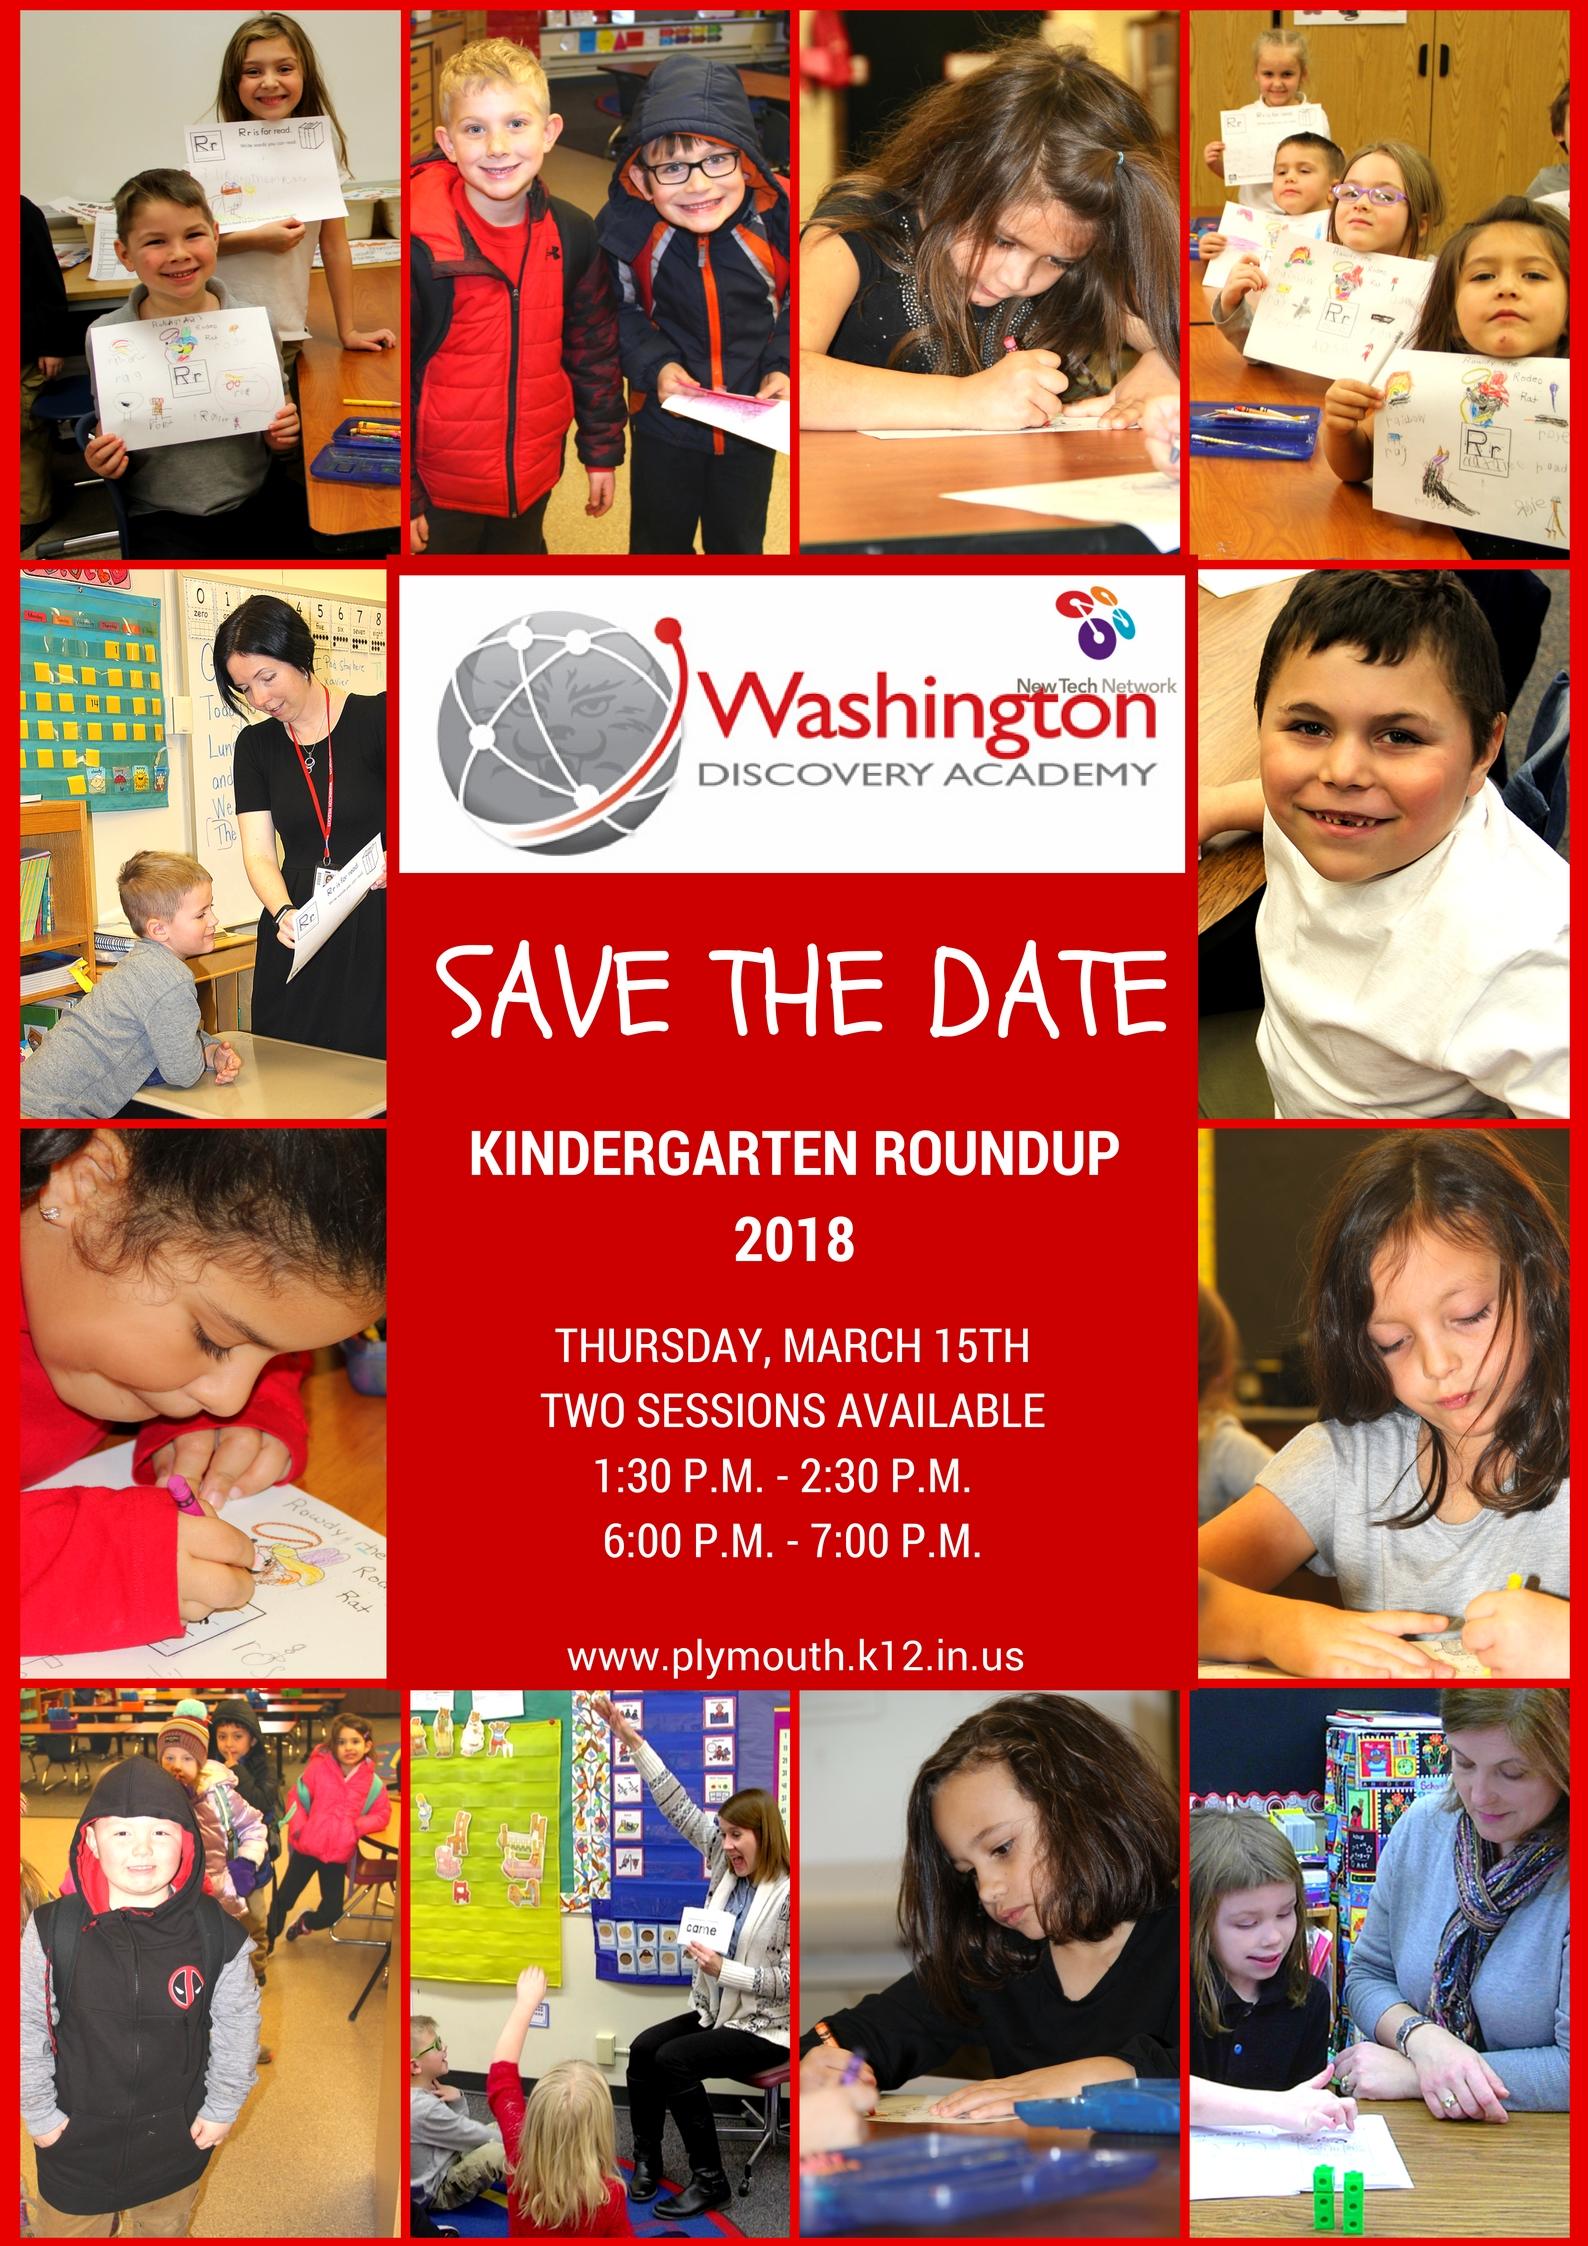 Washington Discovery Academy Kindergarten Roundup Save the Date pictures of students. Plymouth Community School Corporation (PCSC) will host the 2018 Kindergarten Roundup on Thursday, March 15, 2018. Two sessions will be offered; 1:30 p.m. to 2:30 p.m. and 6:00 p.m. to 7:00 p.m. at each of our four elementary schools.  